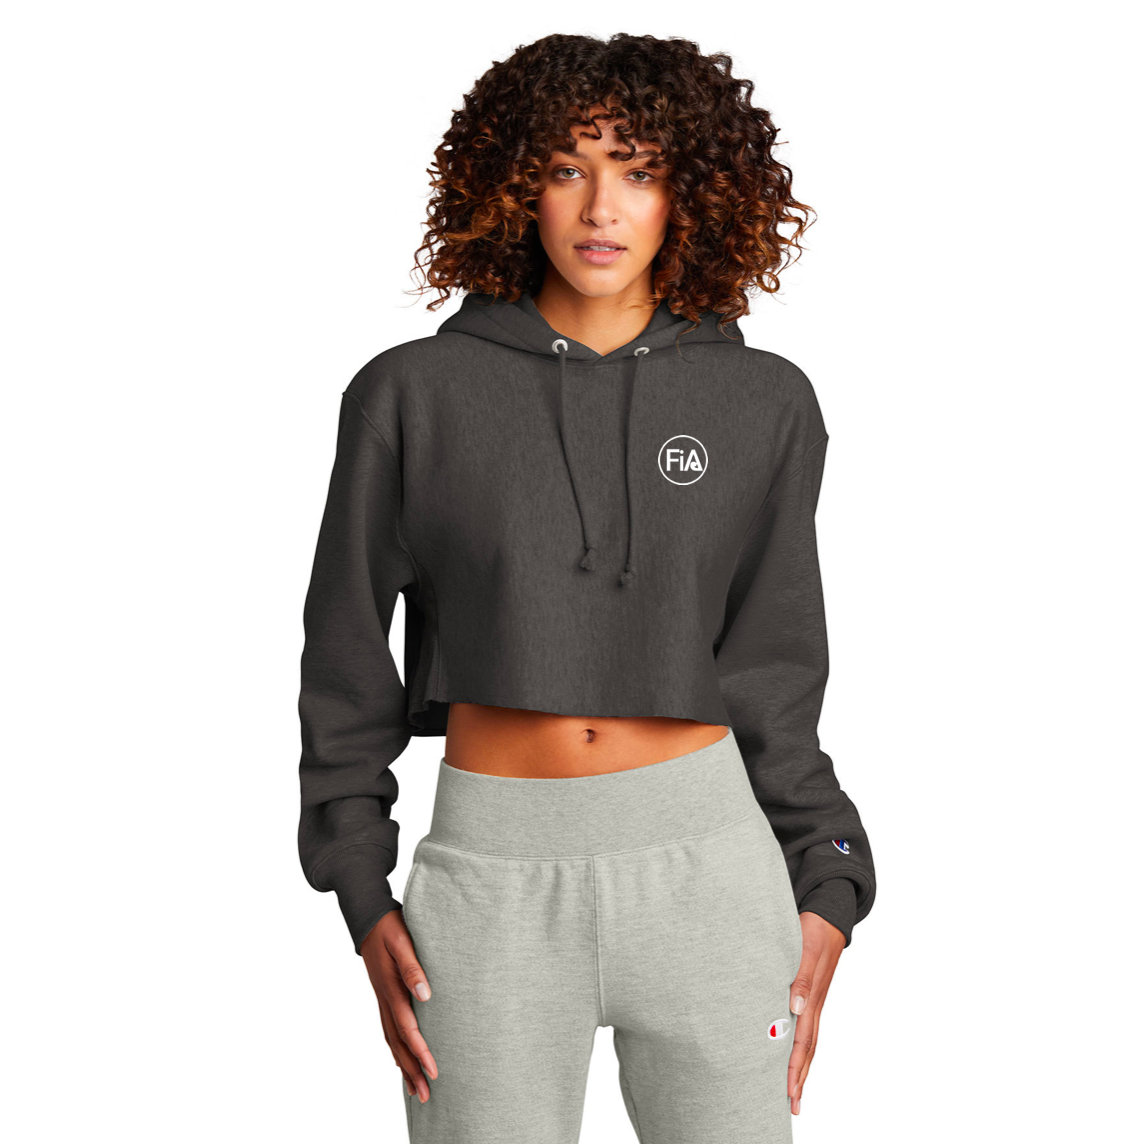 FiA Champion Women’s Reverse Weave Cropped Cut-Off Hooded Sweatshirt - Made to Order